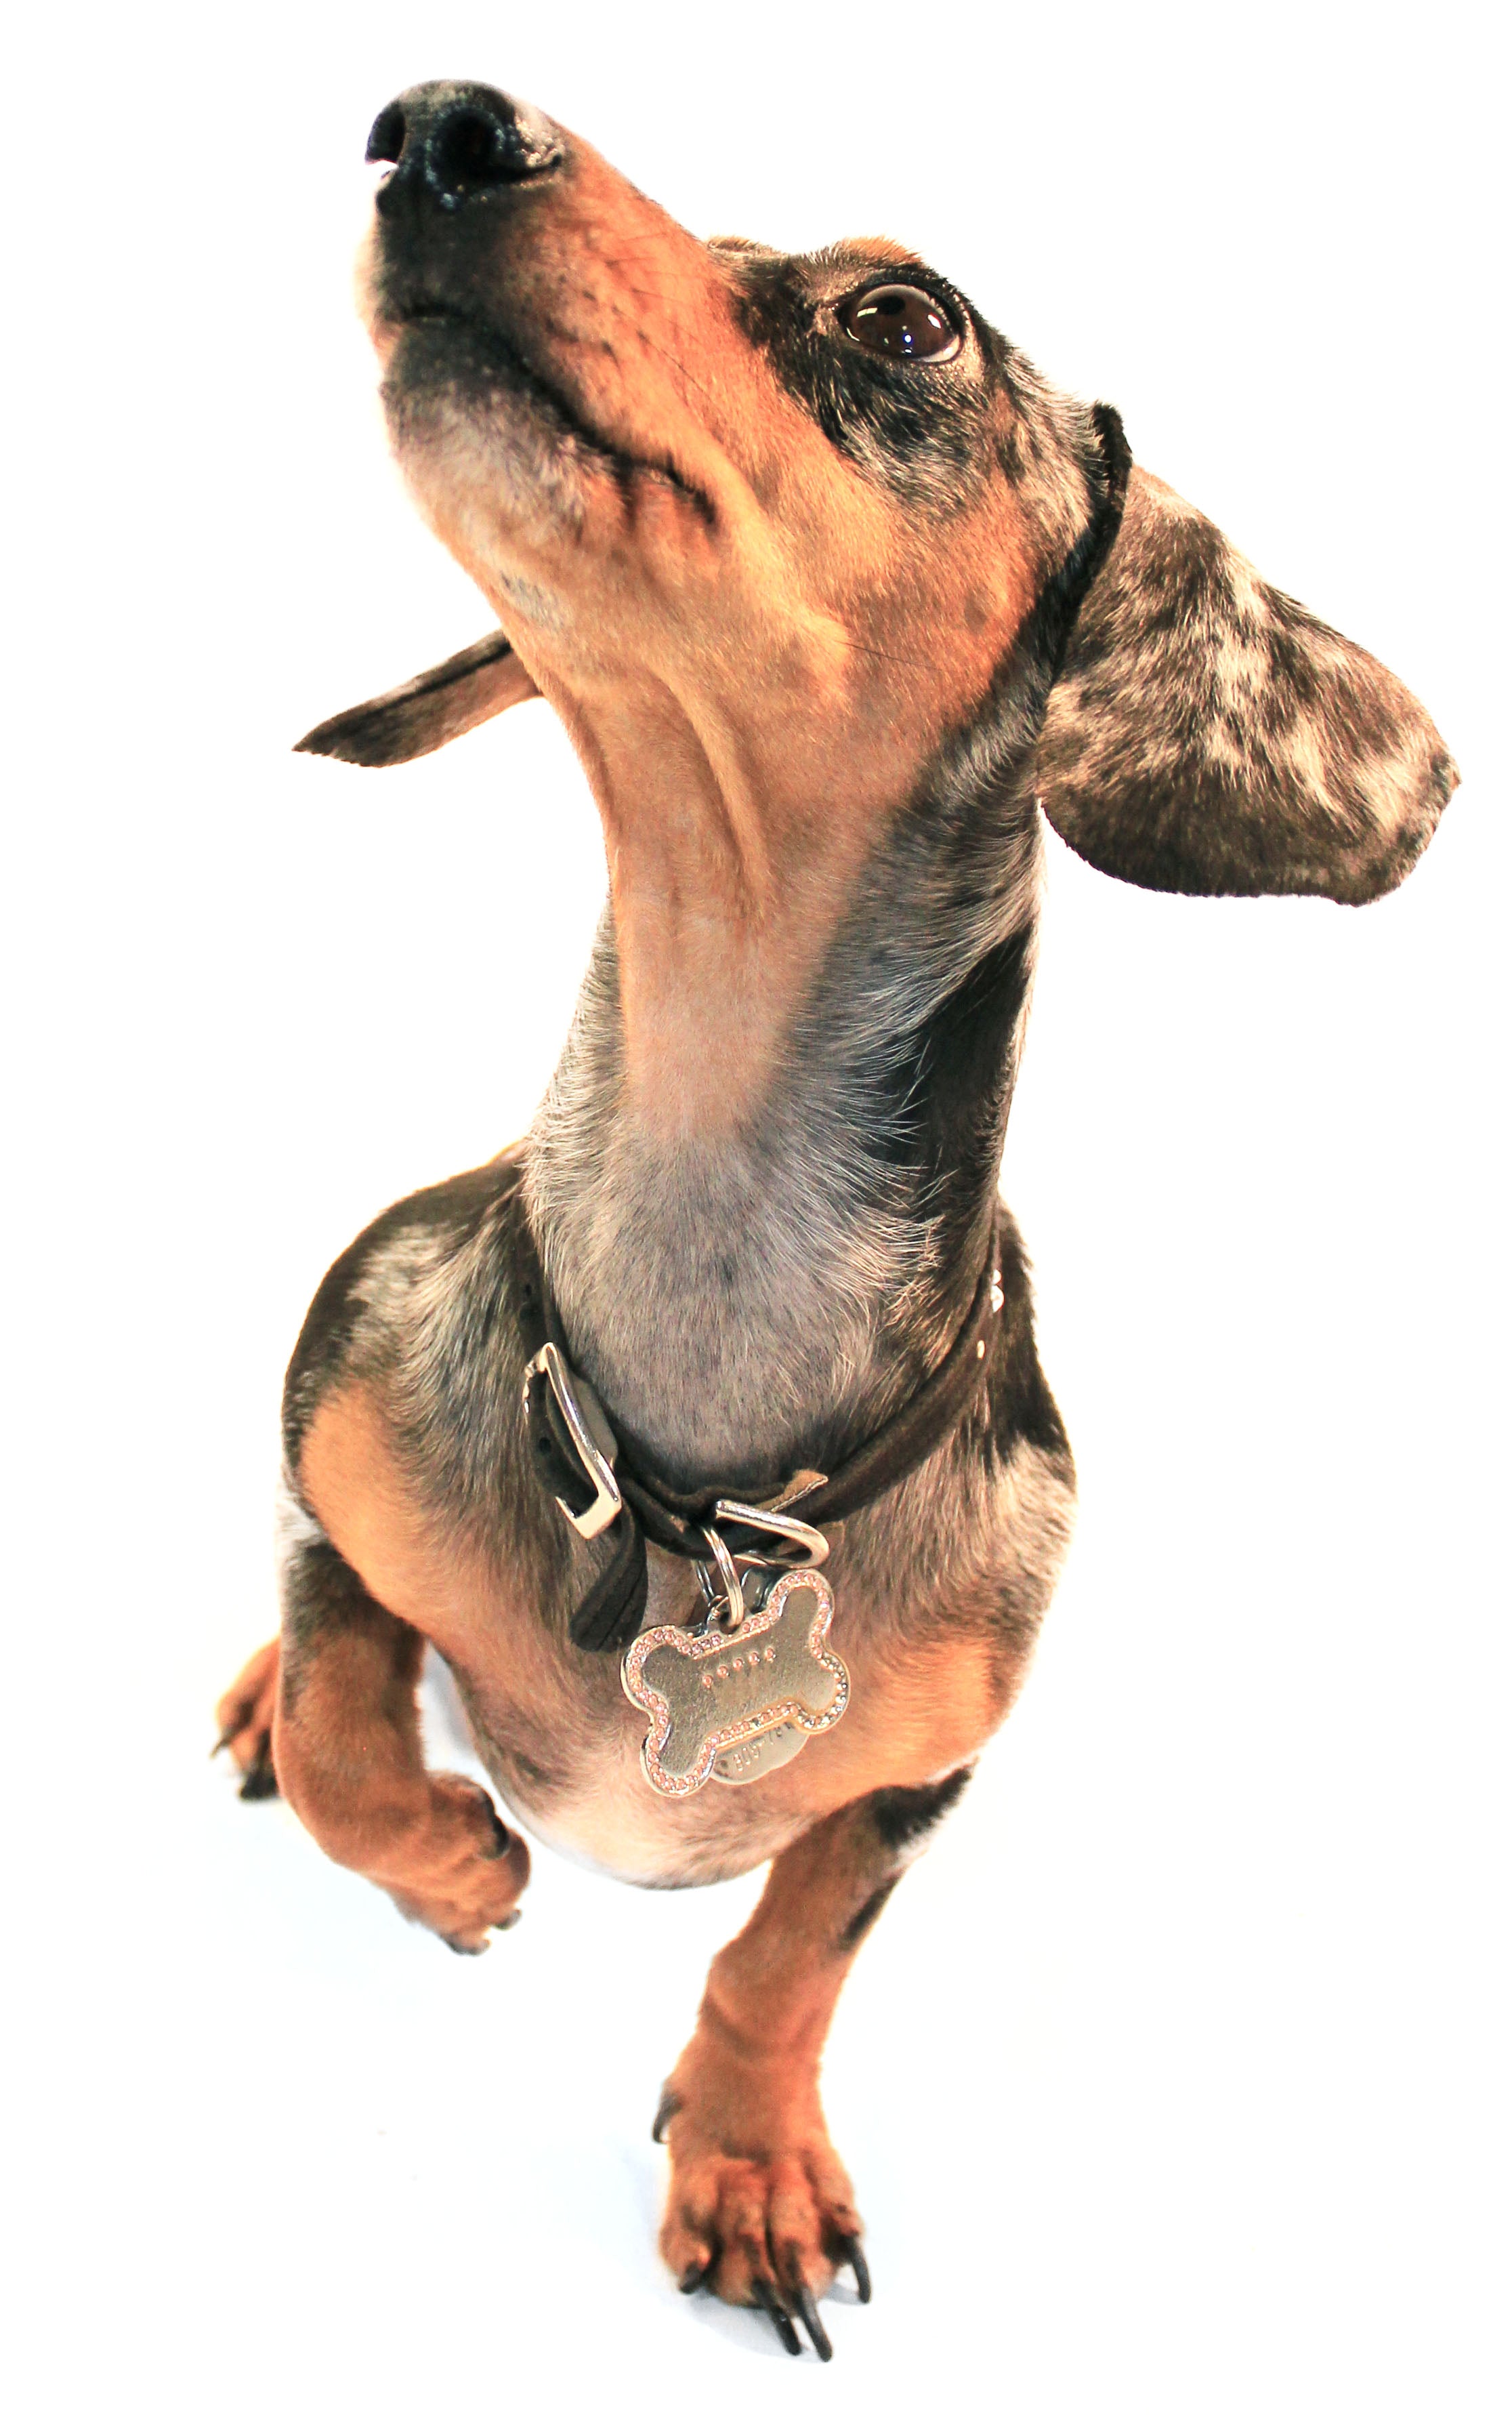 A small dachshund with spotted brown fur lifting a paw up into the air as he gets ready to play.